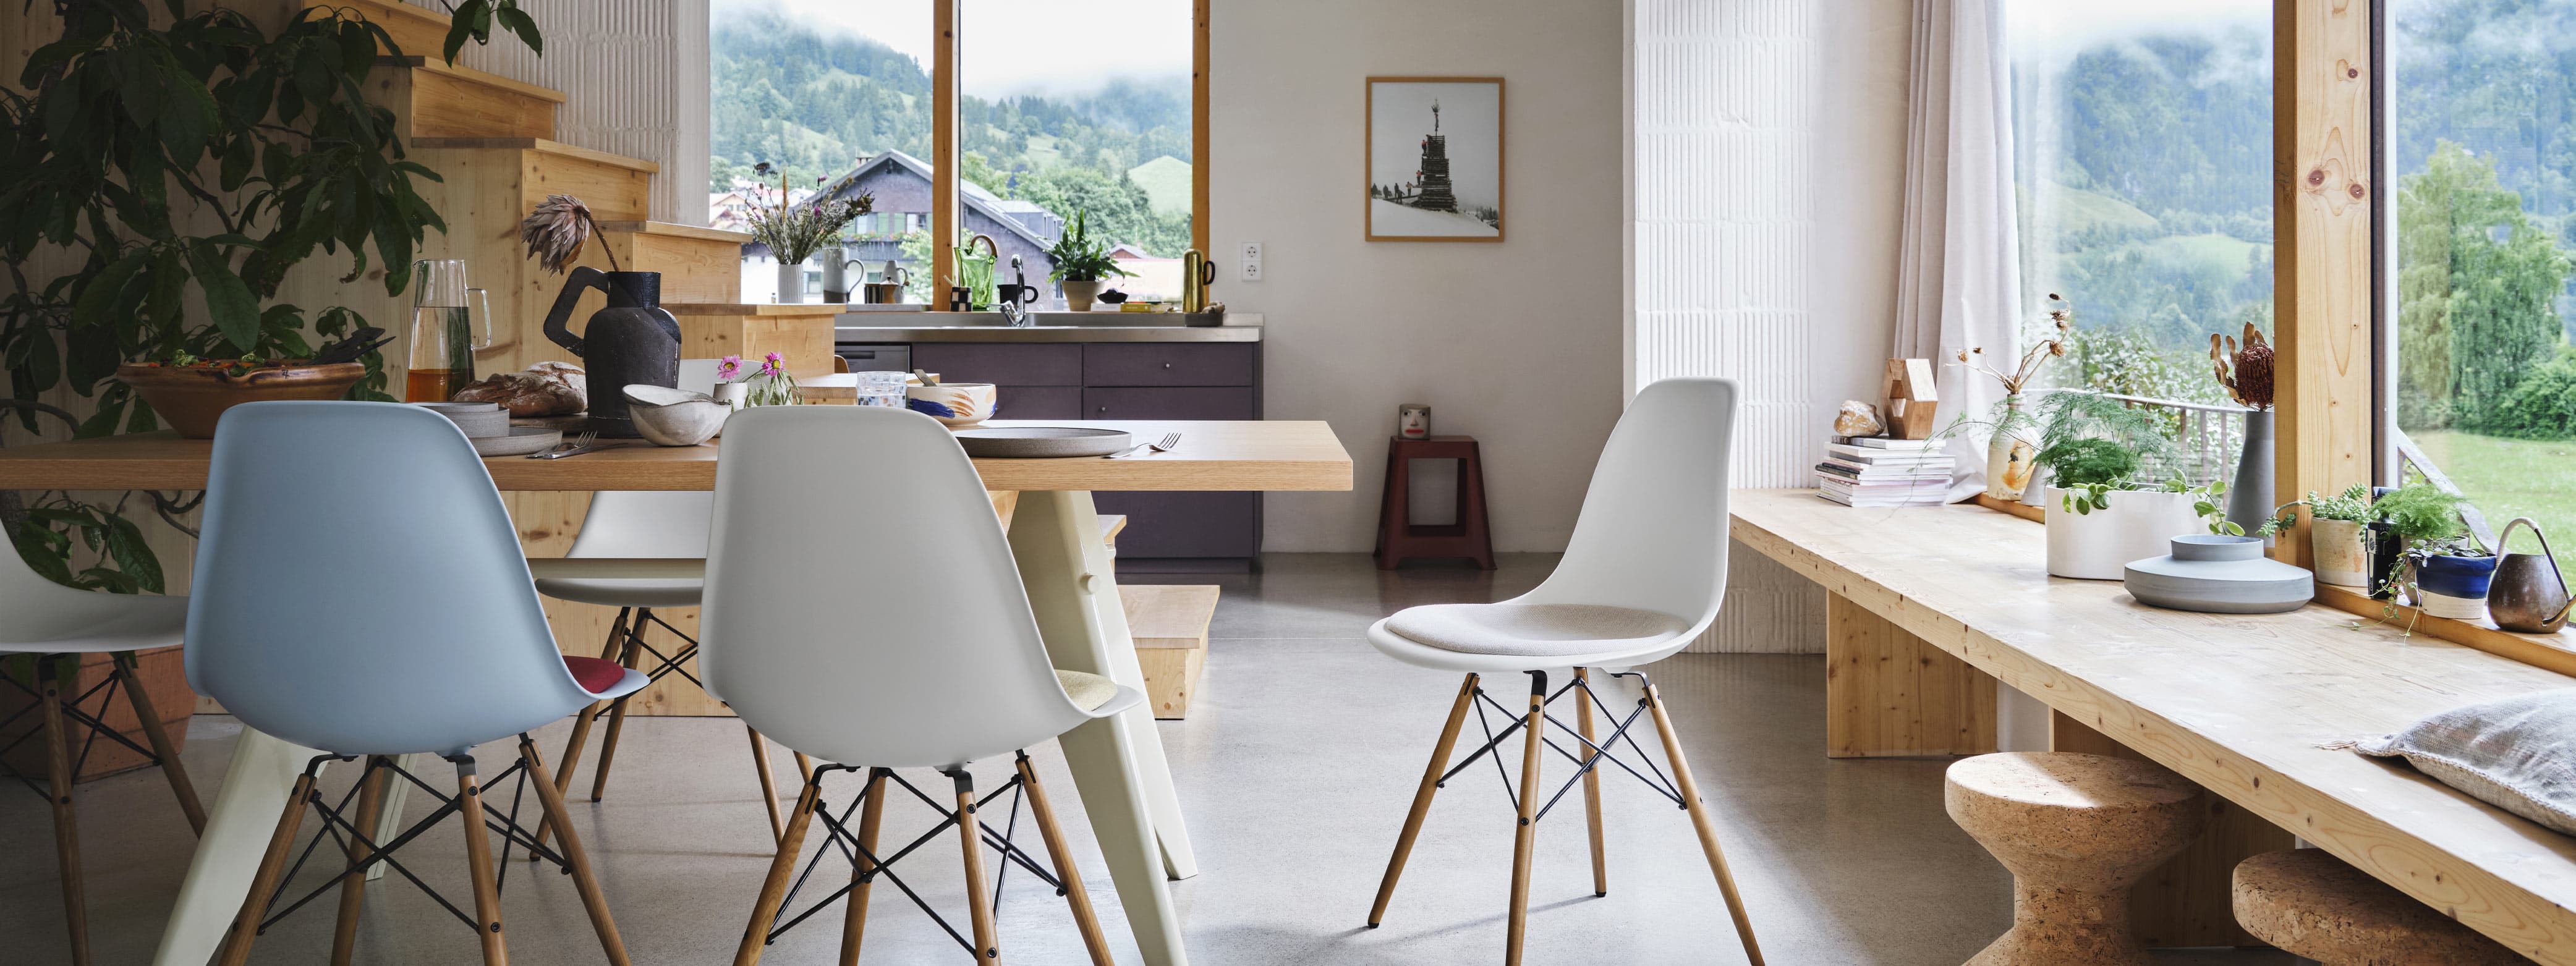 vitra-eames-plastic-side-chair-re-dsw-em-table-cork-family-model-a-b-shop-online-pronta-consegna